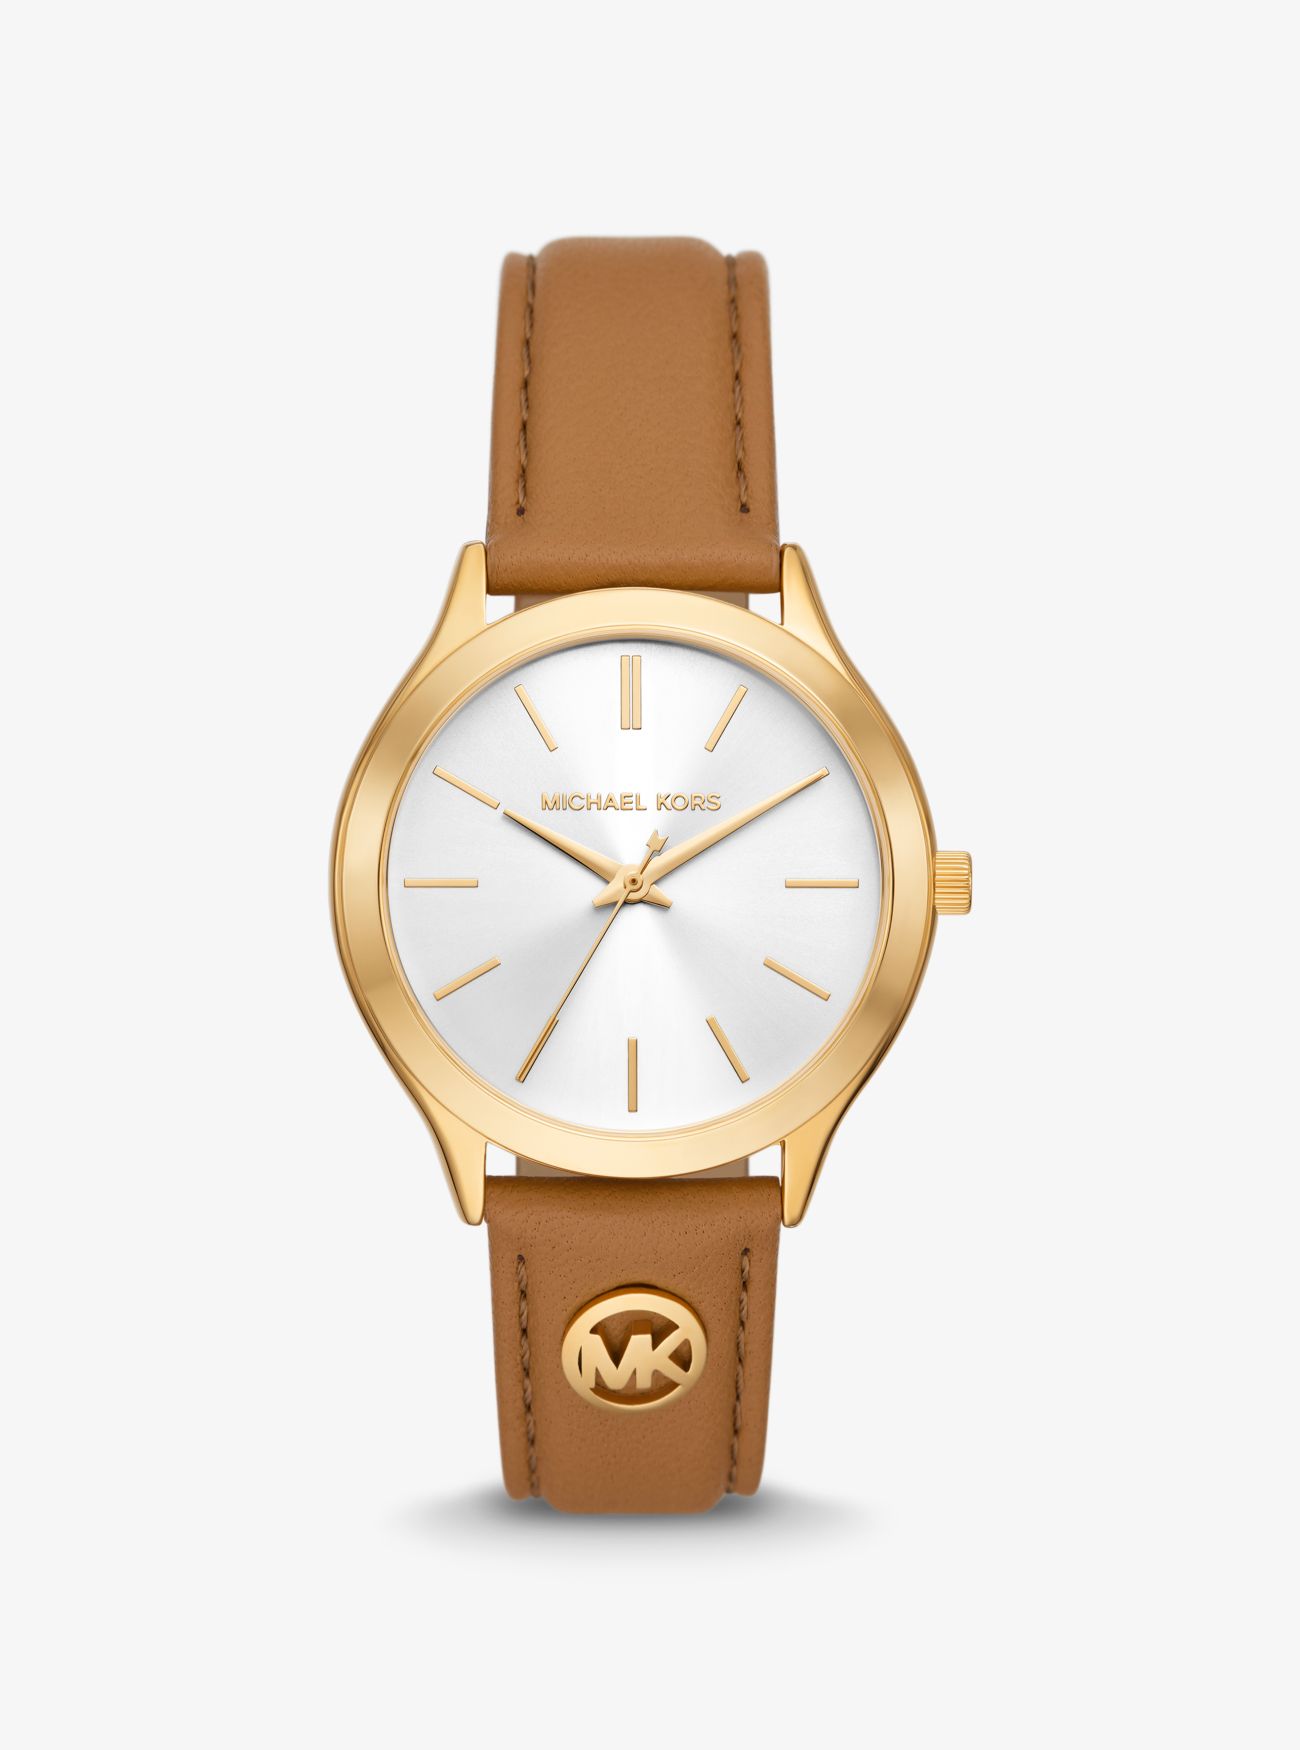 MK Slim Runway Gold-Tone and Leather Watch - Luggage Brown - Michael Kors